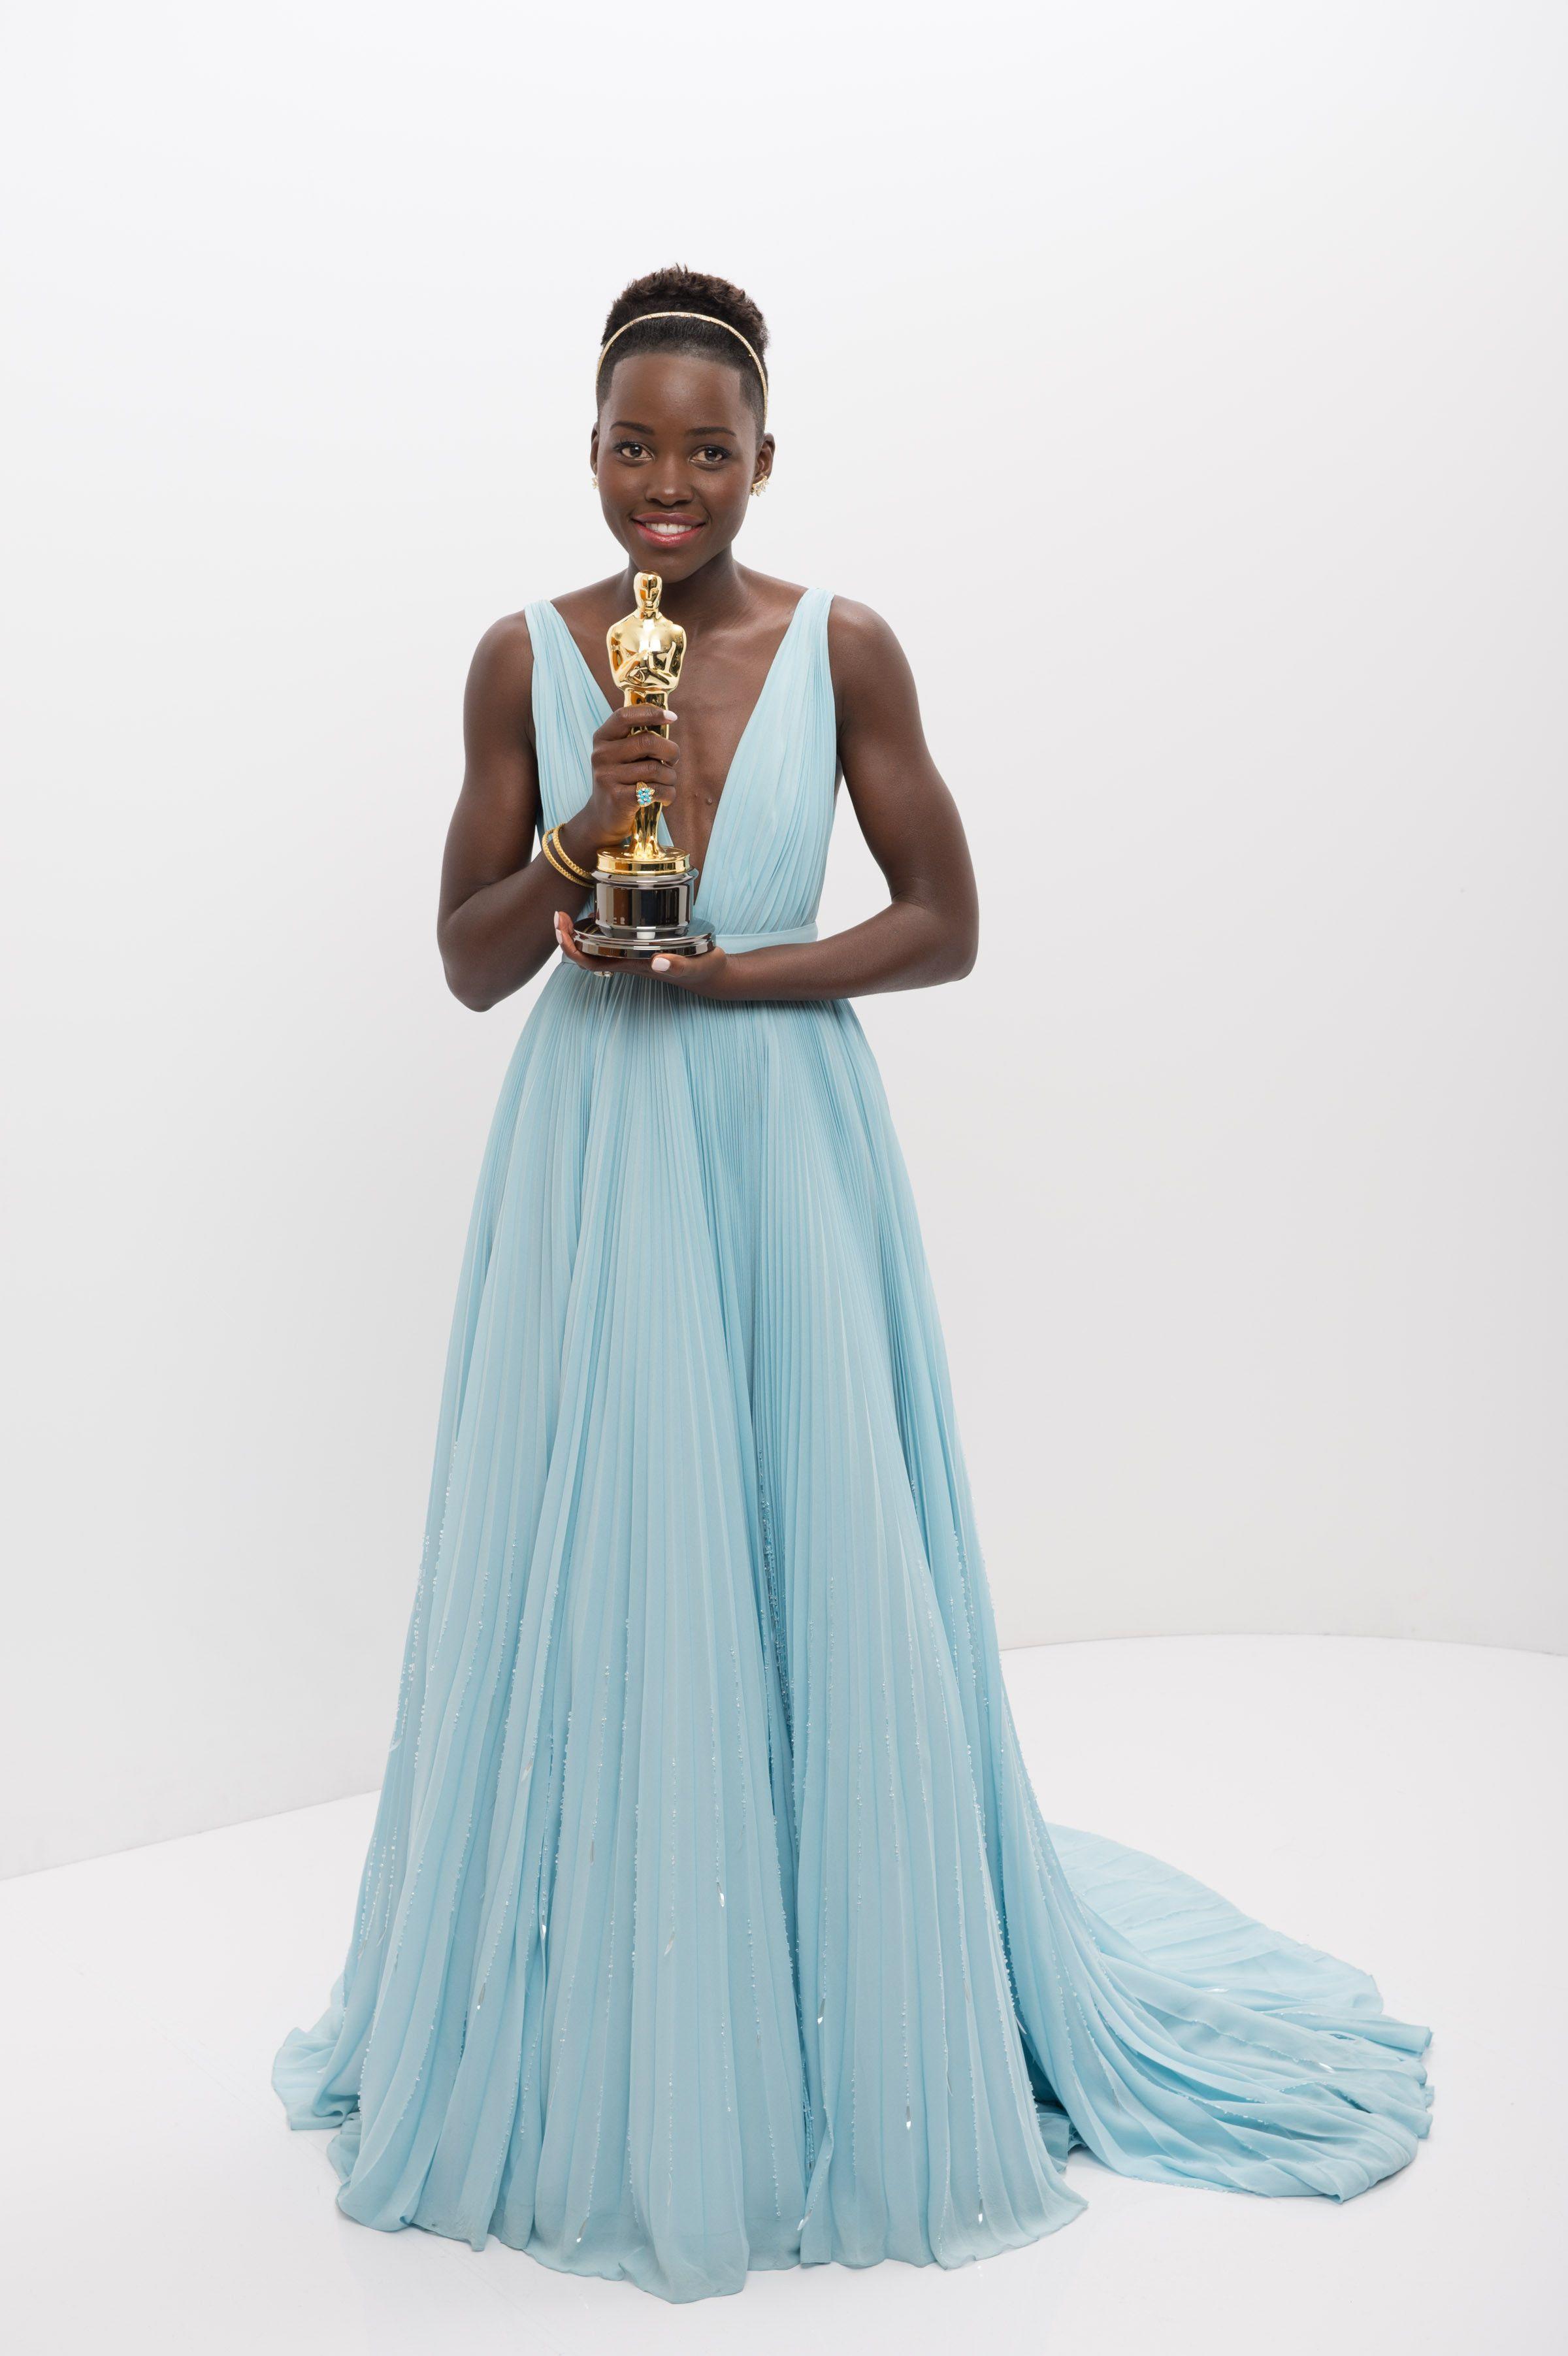 Lupita Nyong'o with her Oscar statuette [2400x3606]